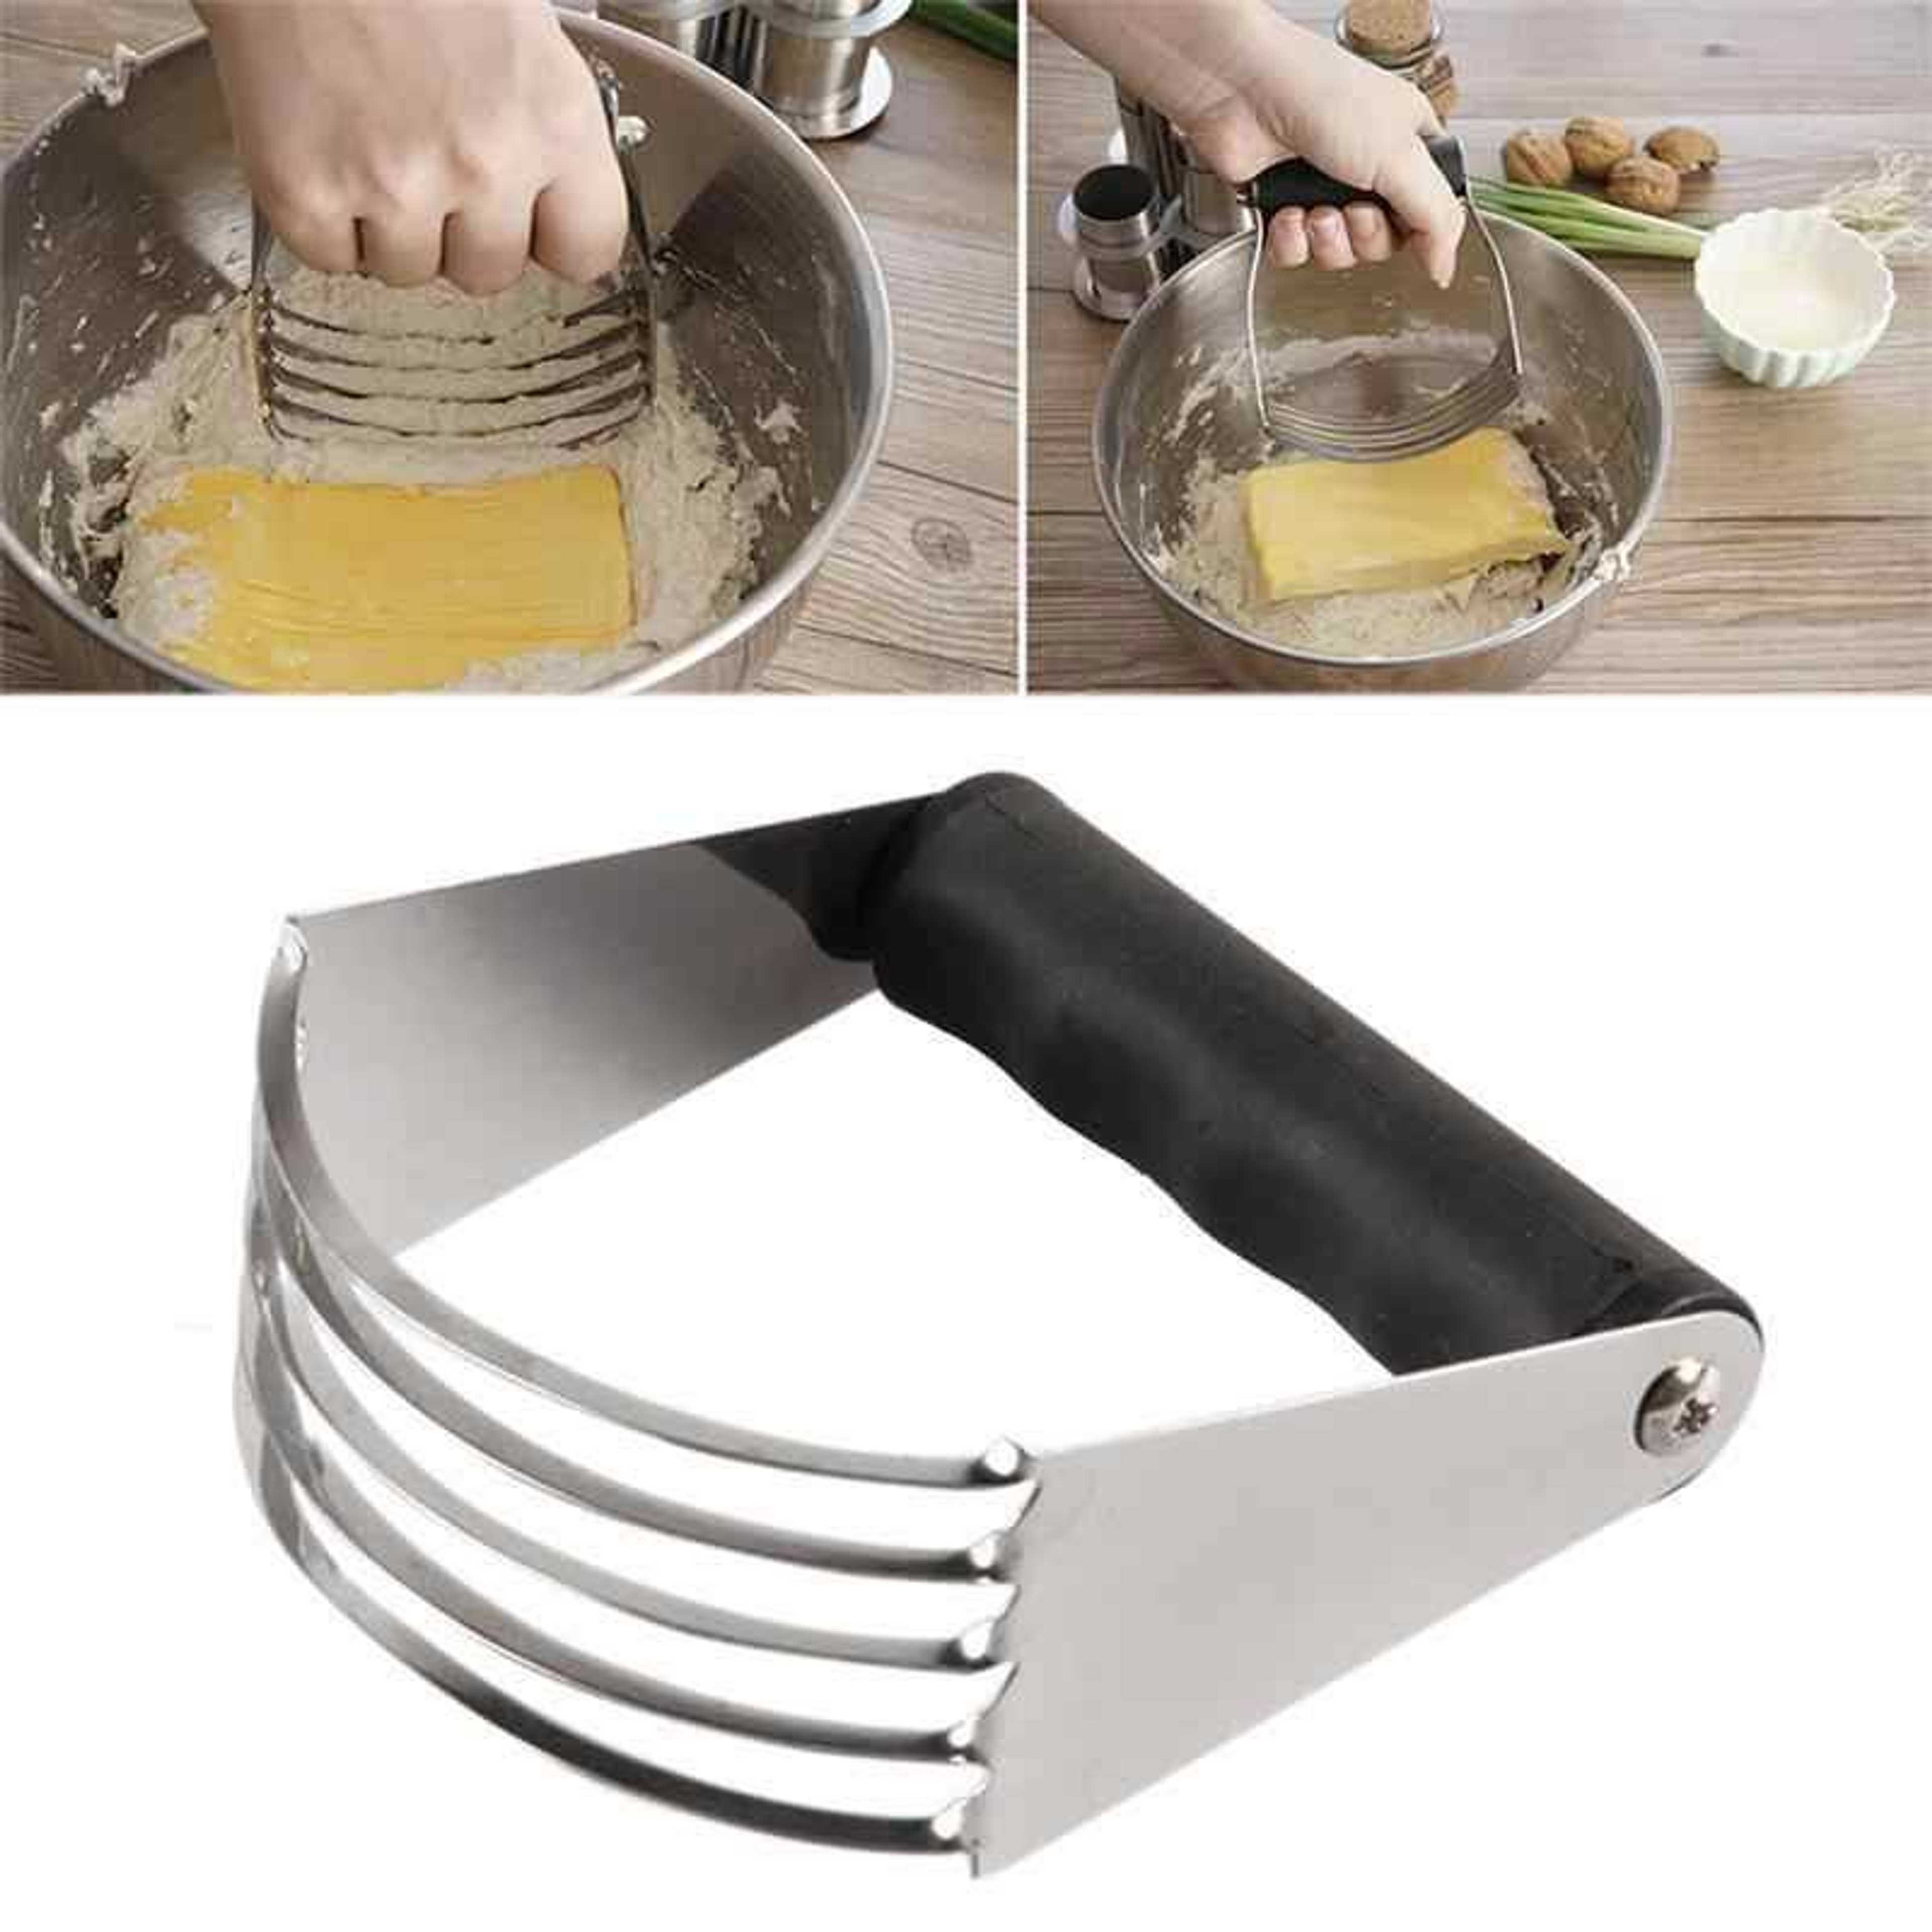 Stainless Steel Pastry Blender With Plastic Handle, Dough Blender, Pie Crust Biscuit Masher